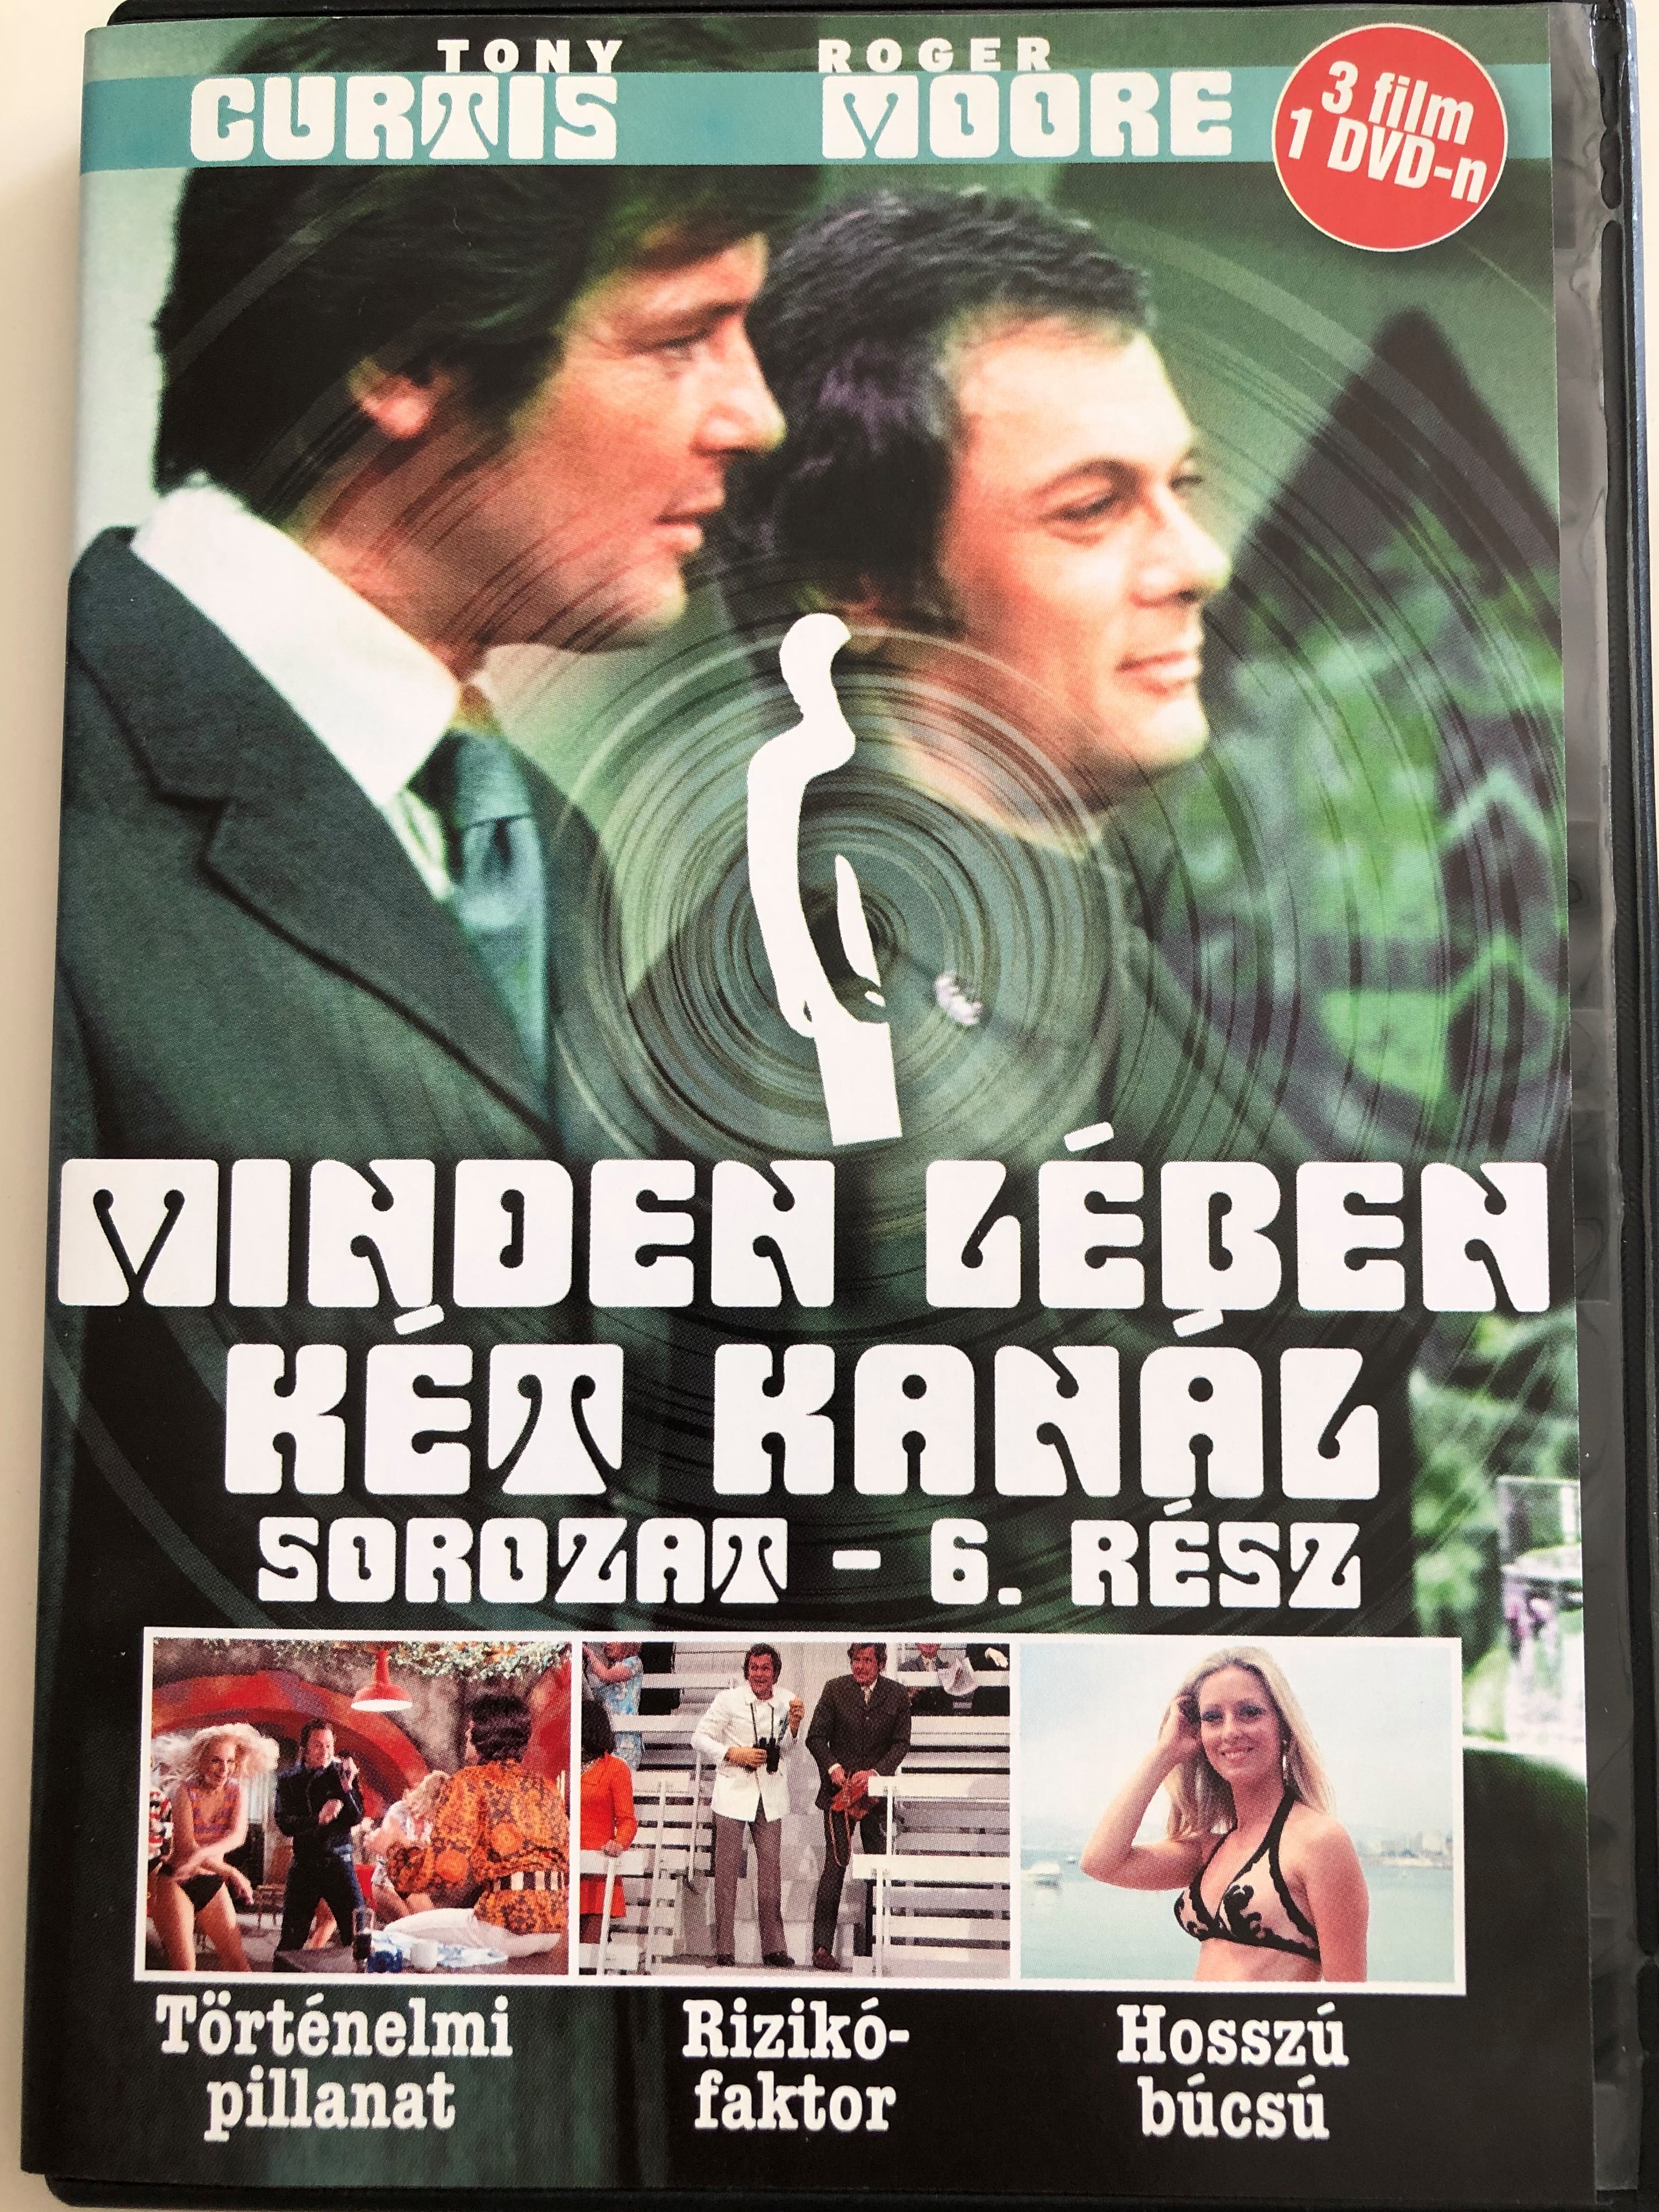 the-persuaders-series-vol-6.-dvd-1971-minden-l-ben-k-t-kan-l-sorozat-6.-r-sz-directed-by-leslie-norman-roy-ward-baker-basil-dearden-val-guest-starring-roger-moore-tony-curtis-laurence-naismith-bruno-barnabe-imogen-hass-1-.jpg